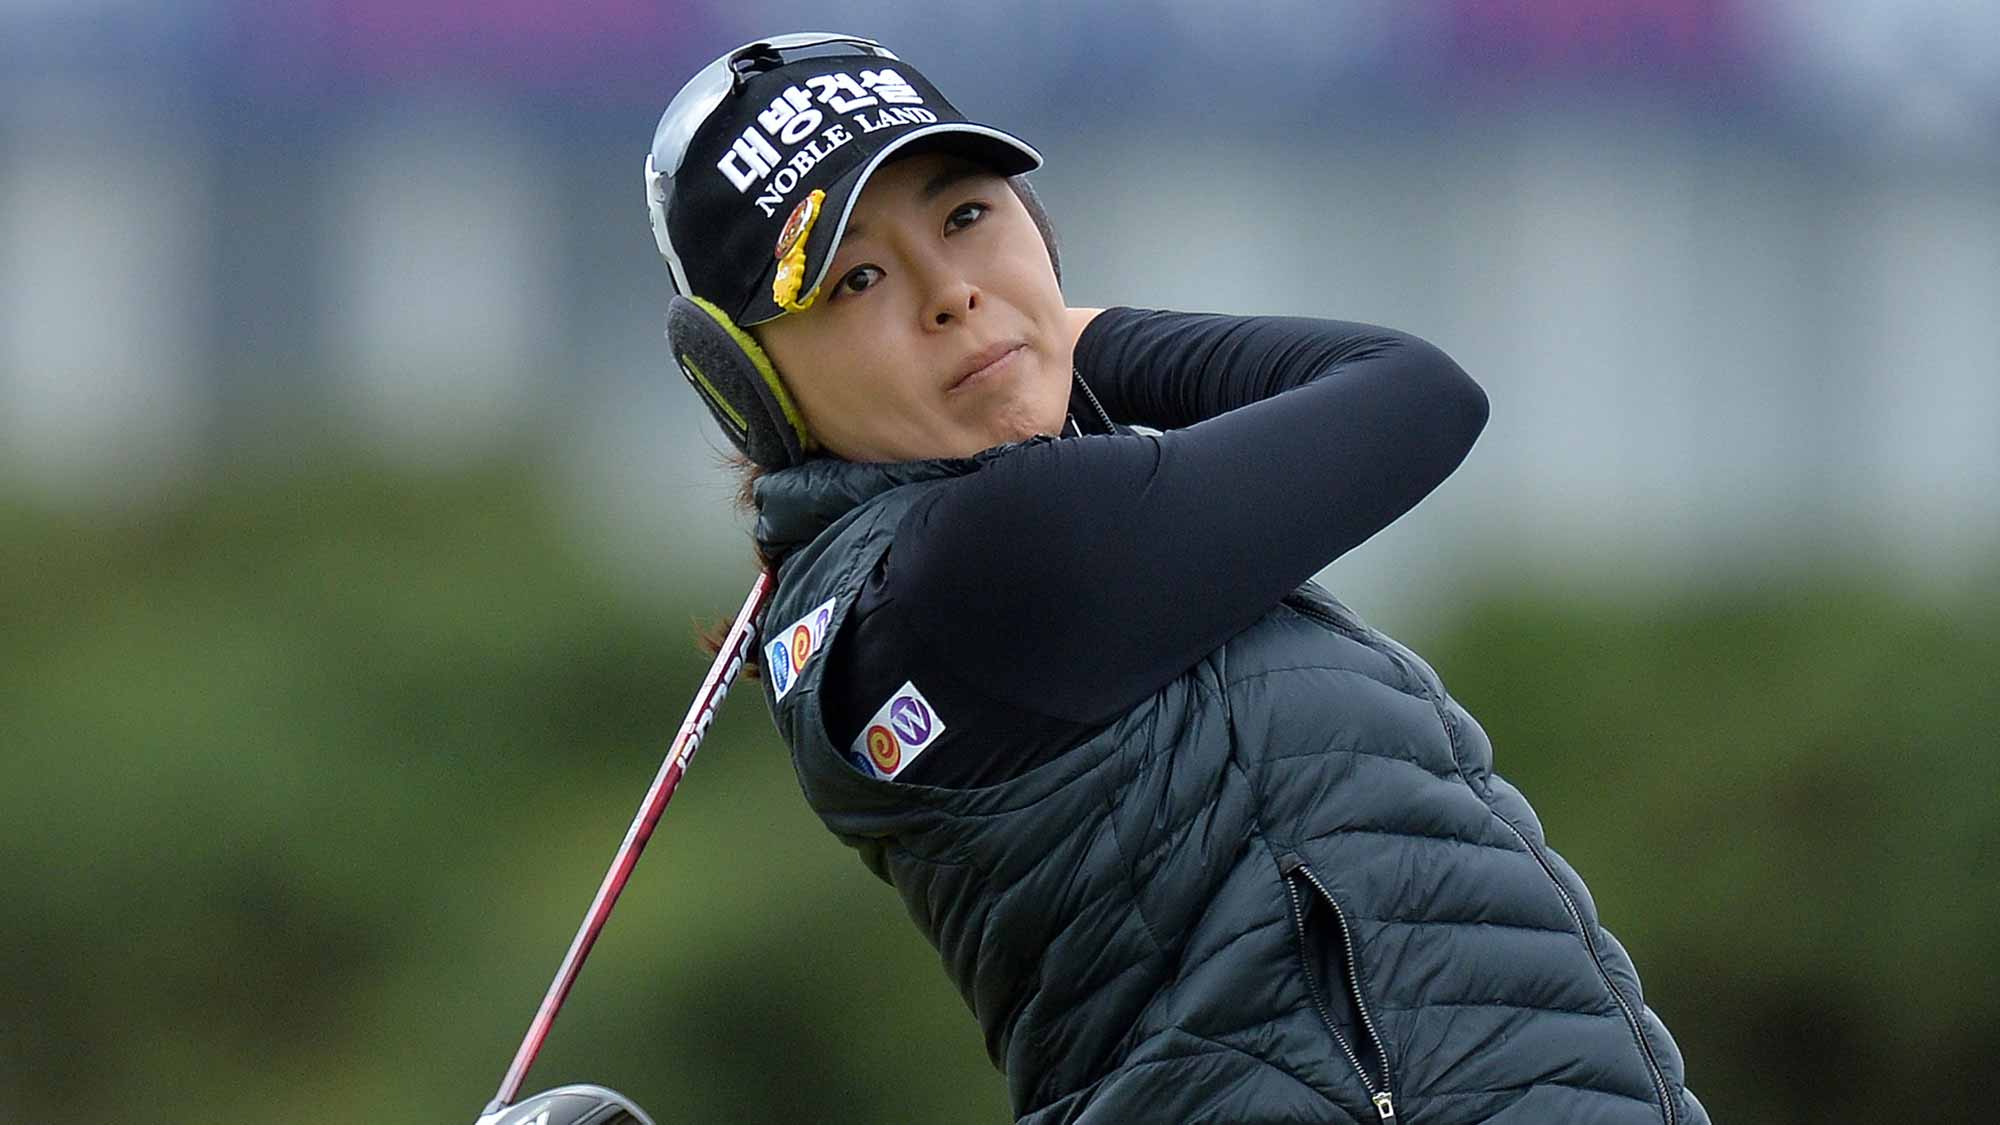 Mi Jung Hur of Korea plays her tee shot to the 1st hole during the final day of the Aberdeen Asset Management Ladies Scottish Open at Dundonald Links Golf Course